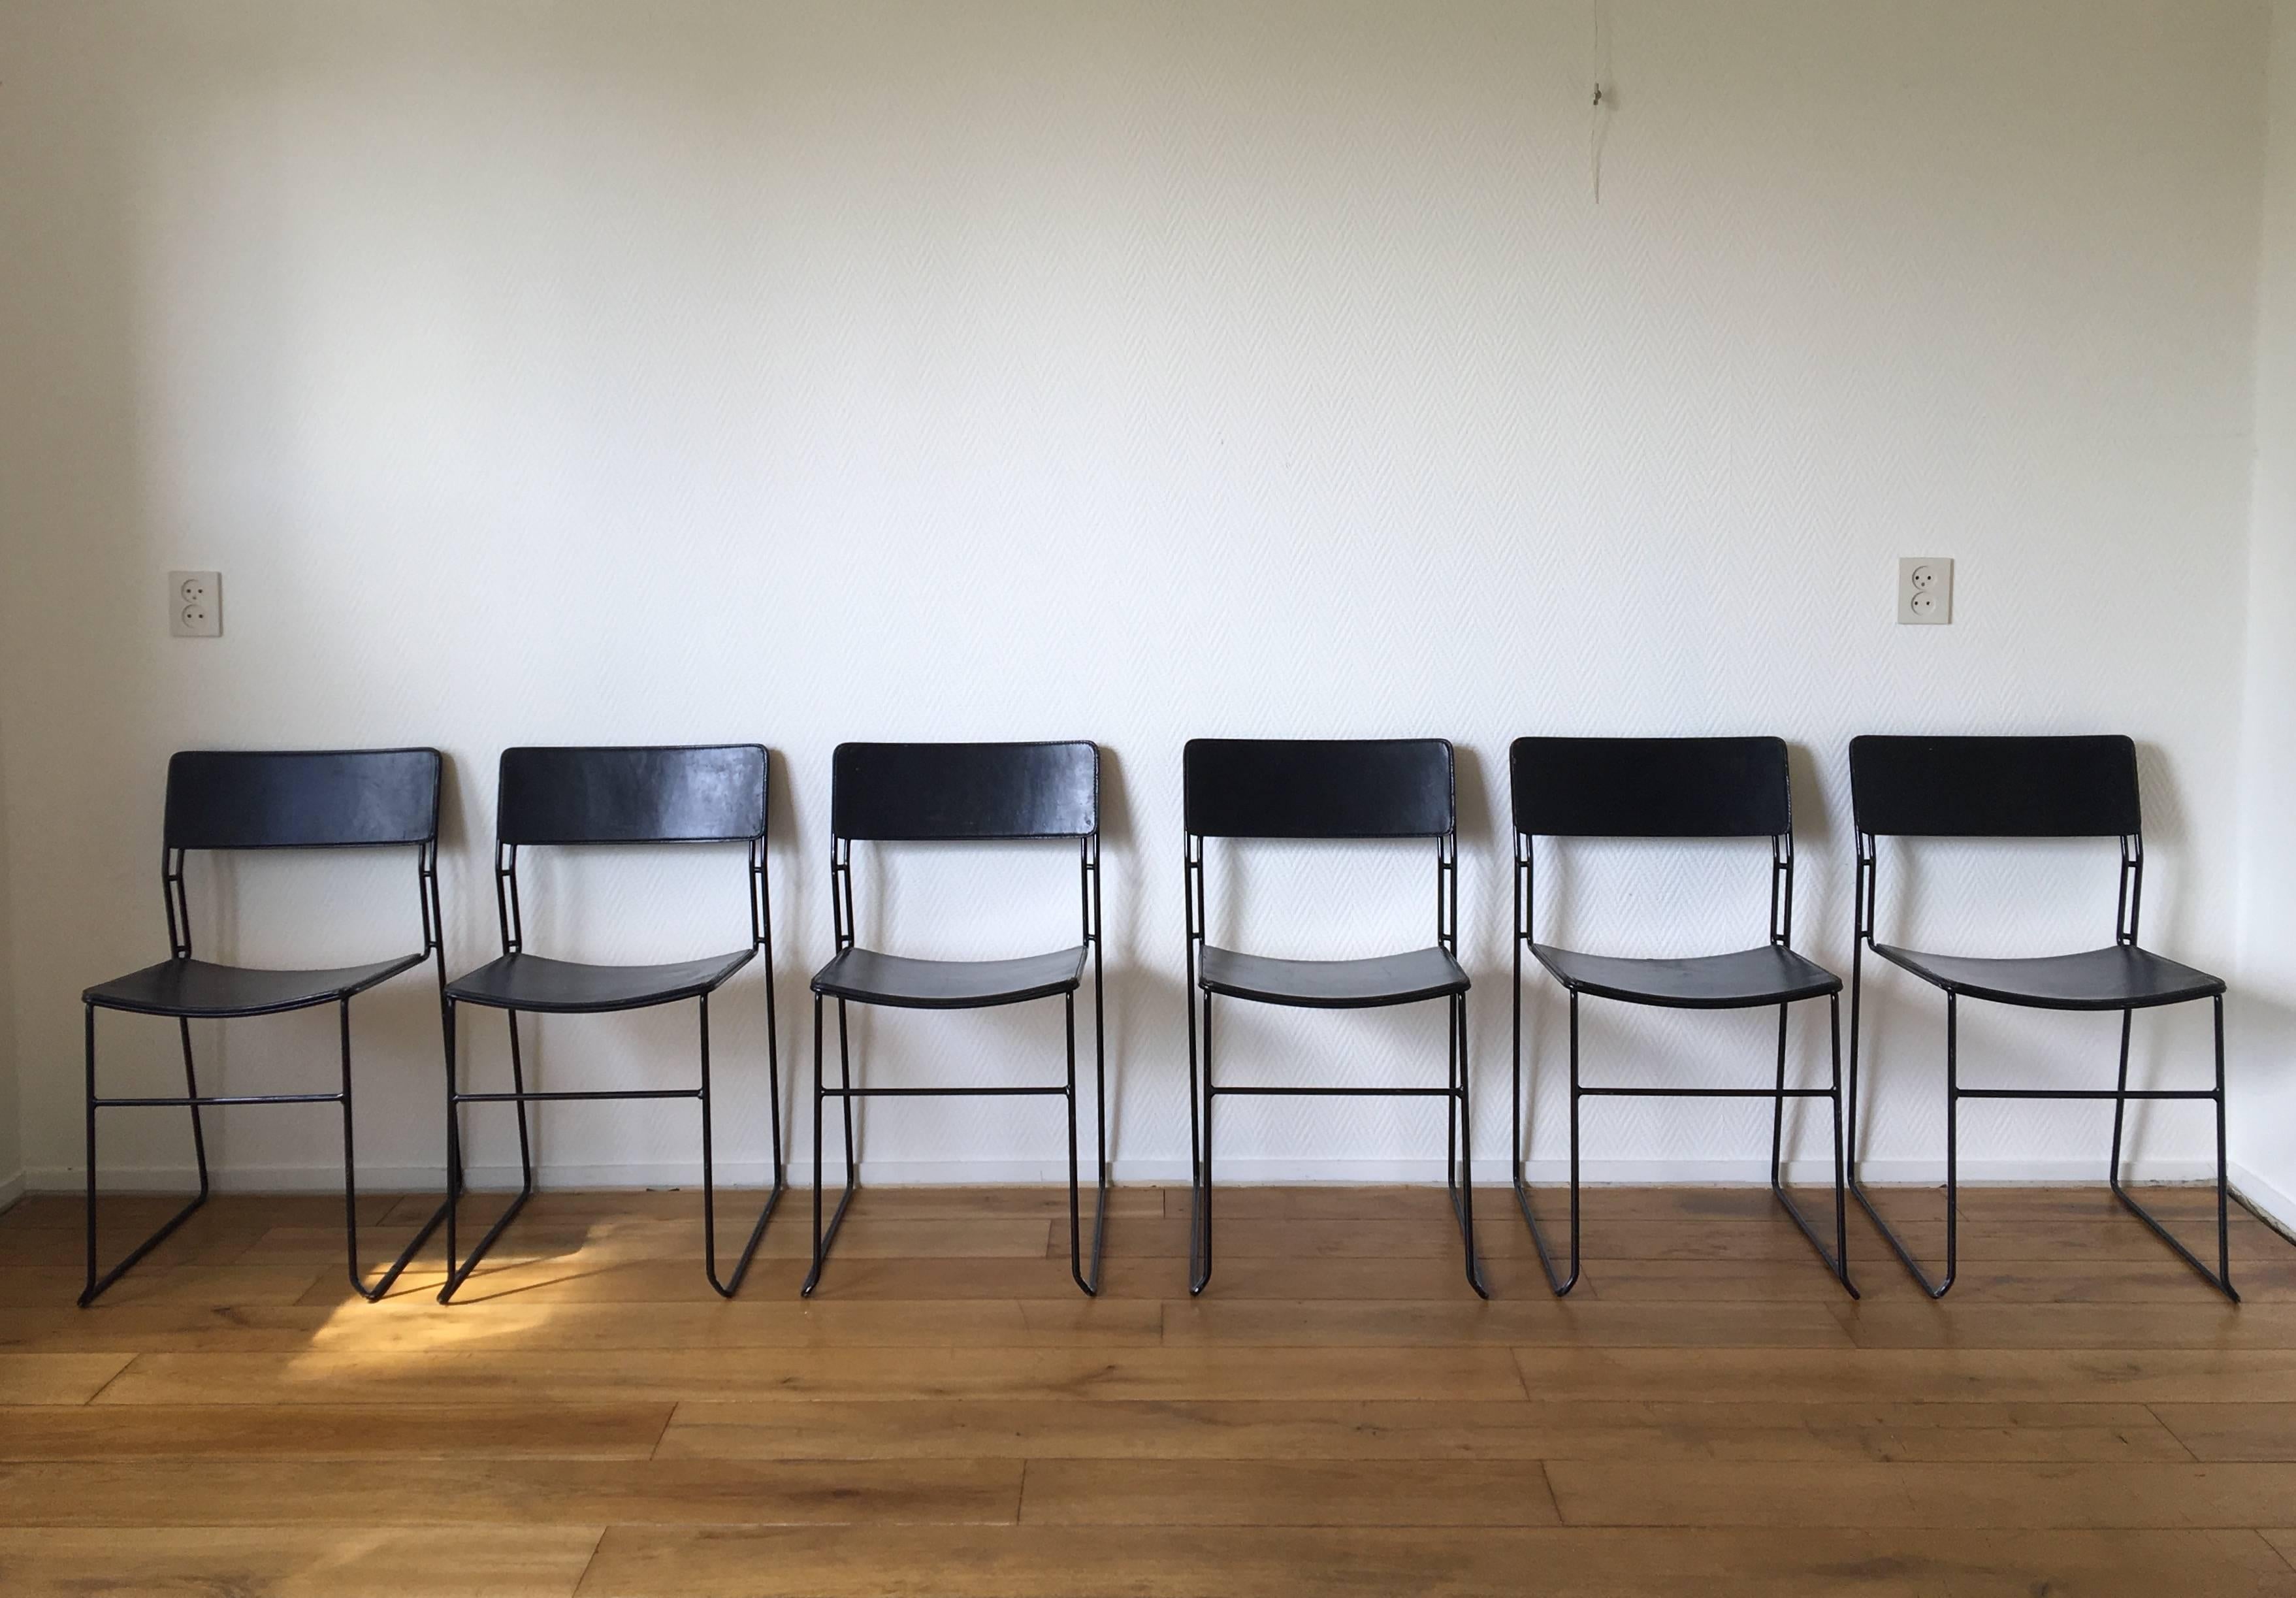 Rare minimalist set of six dining chairs, manufactured by Arrben, Italy. The chairs feature a black enameled heavy metal wire base with thick Black Cuir Leather upholstery. While the chairs are stackable and piled up many times, they show some light